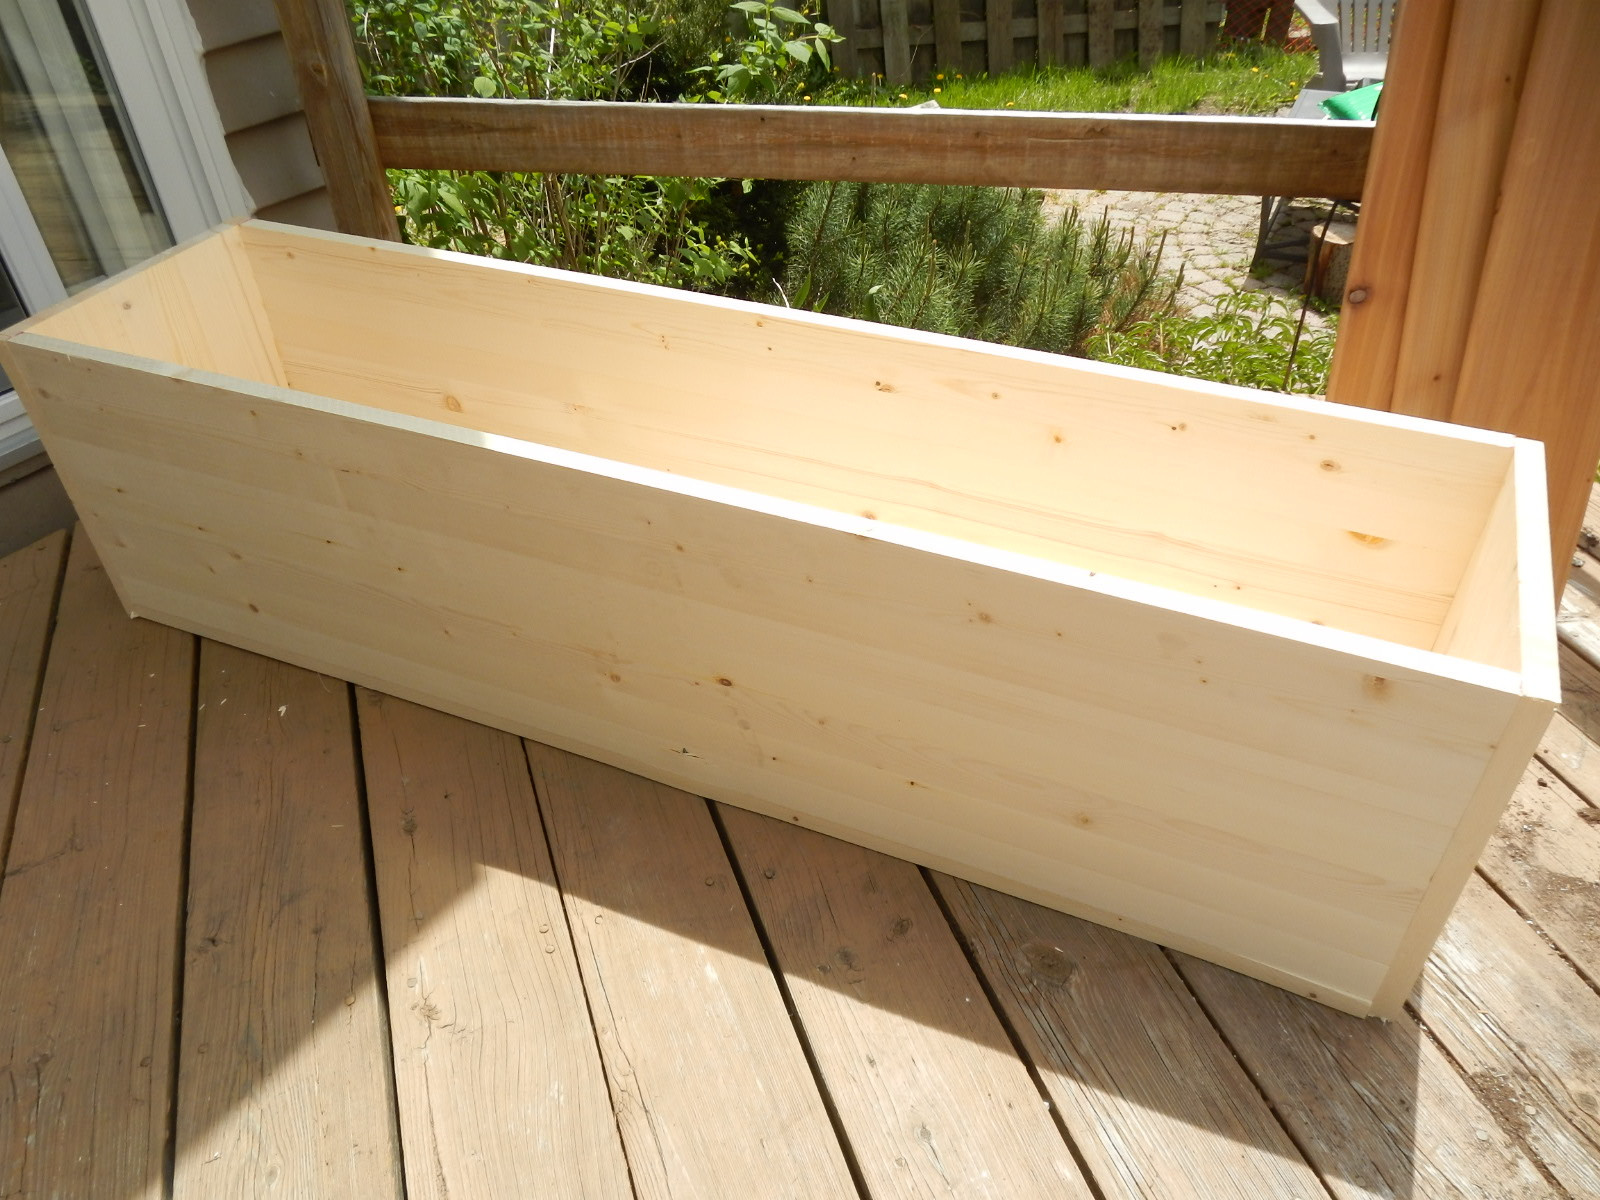 DIY Wooden Planter Boxes
 Planting for Privacy – DIY Wood Planter